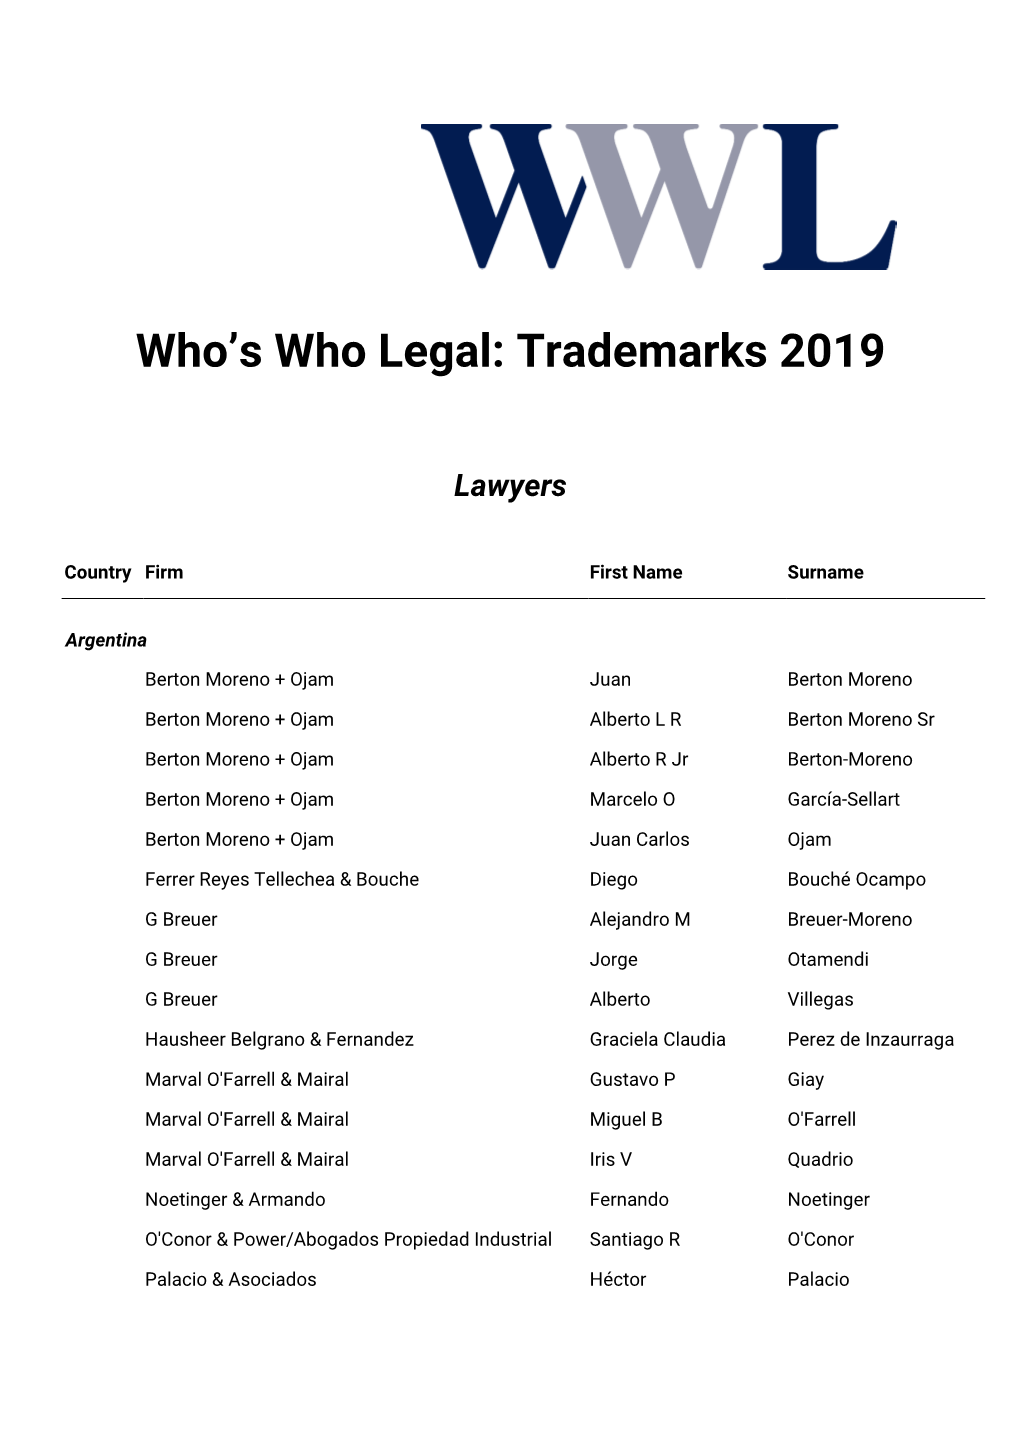 Who's Who Legal: Trademarks 2019